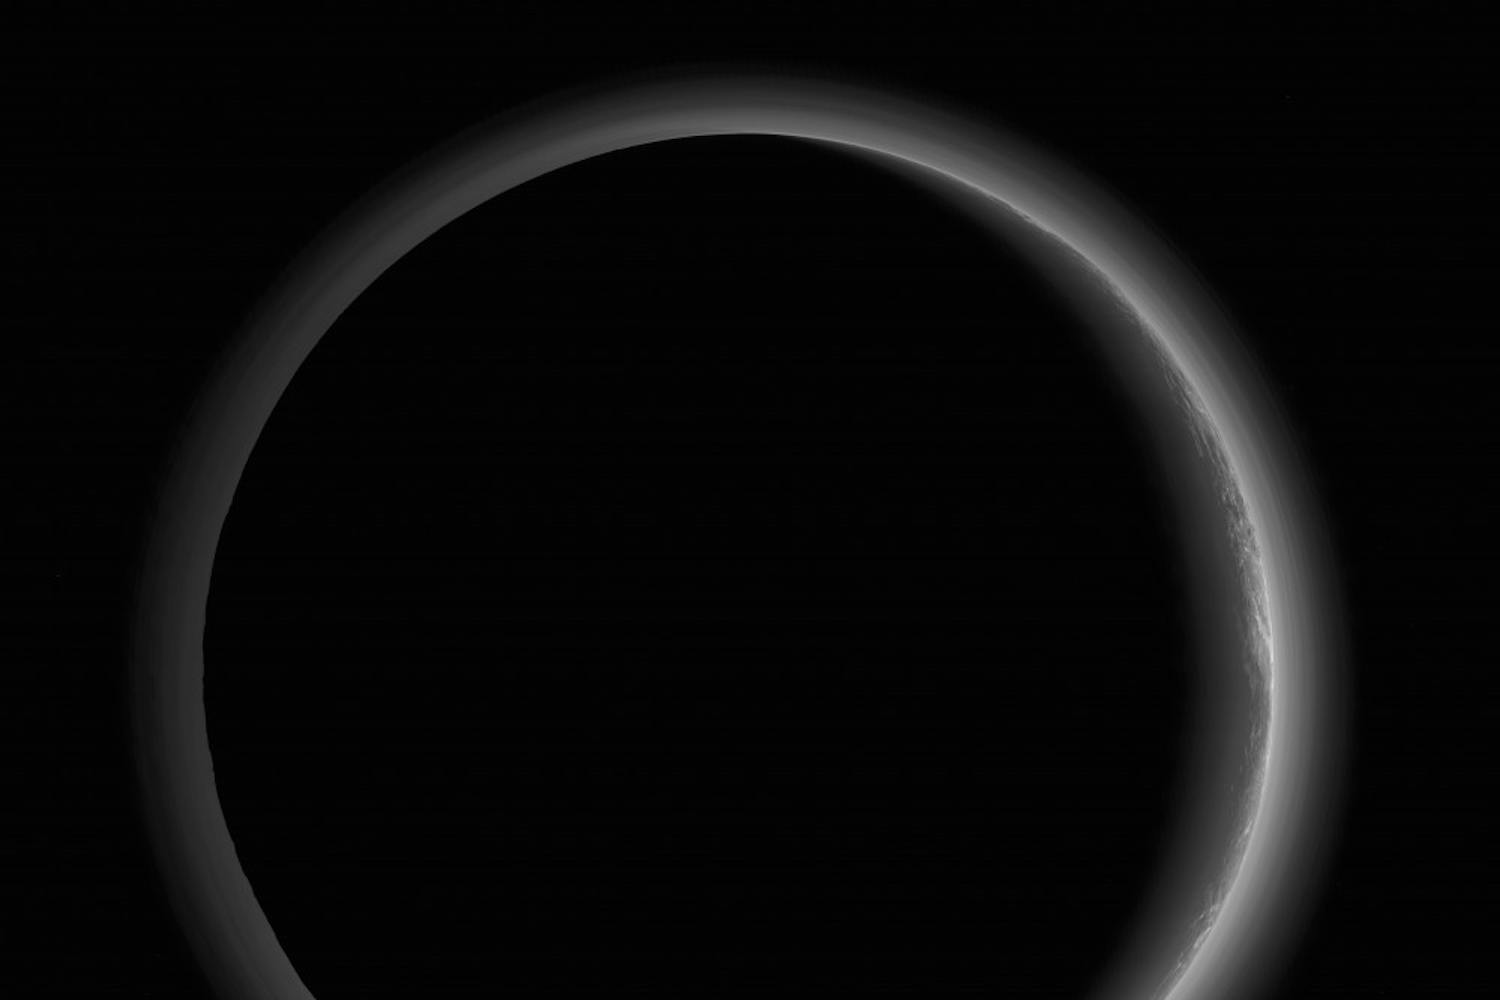 Pluto, a dwarf planet in the Kuiper belt, is pictured in a photo captured by the New Horizon Spacecraft in July 14, 2015.